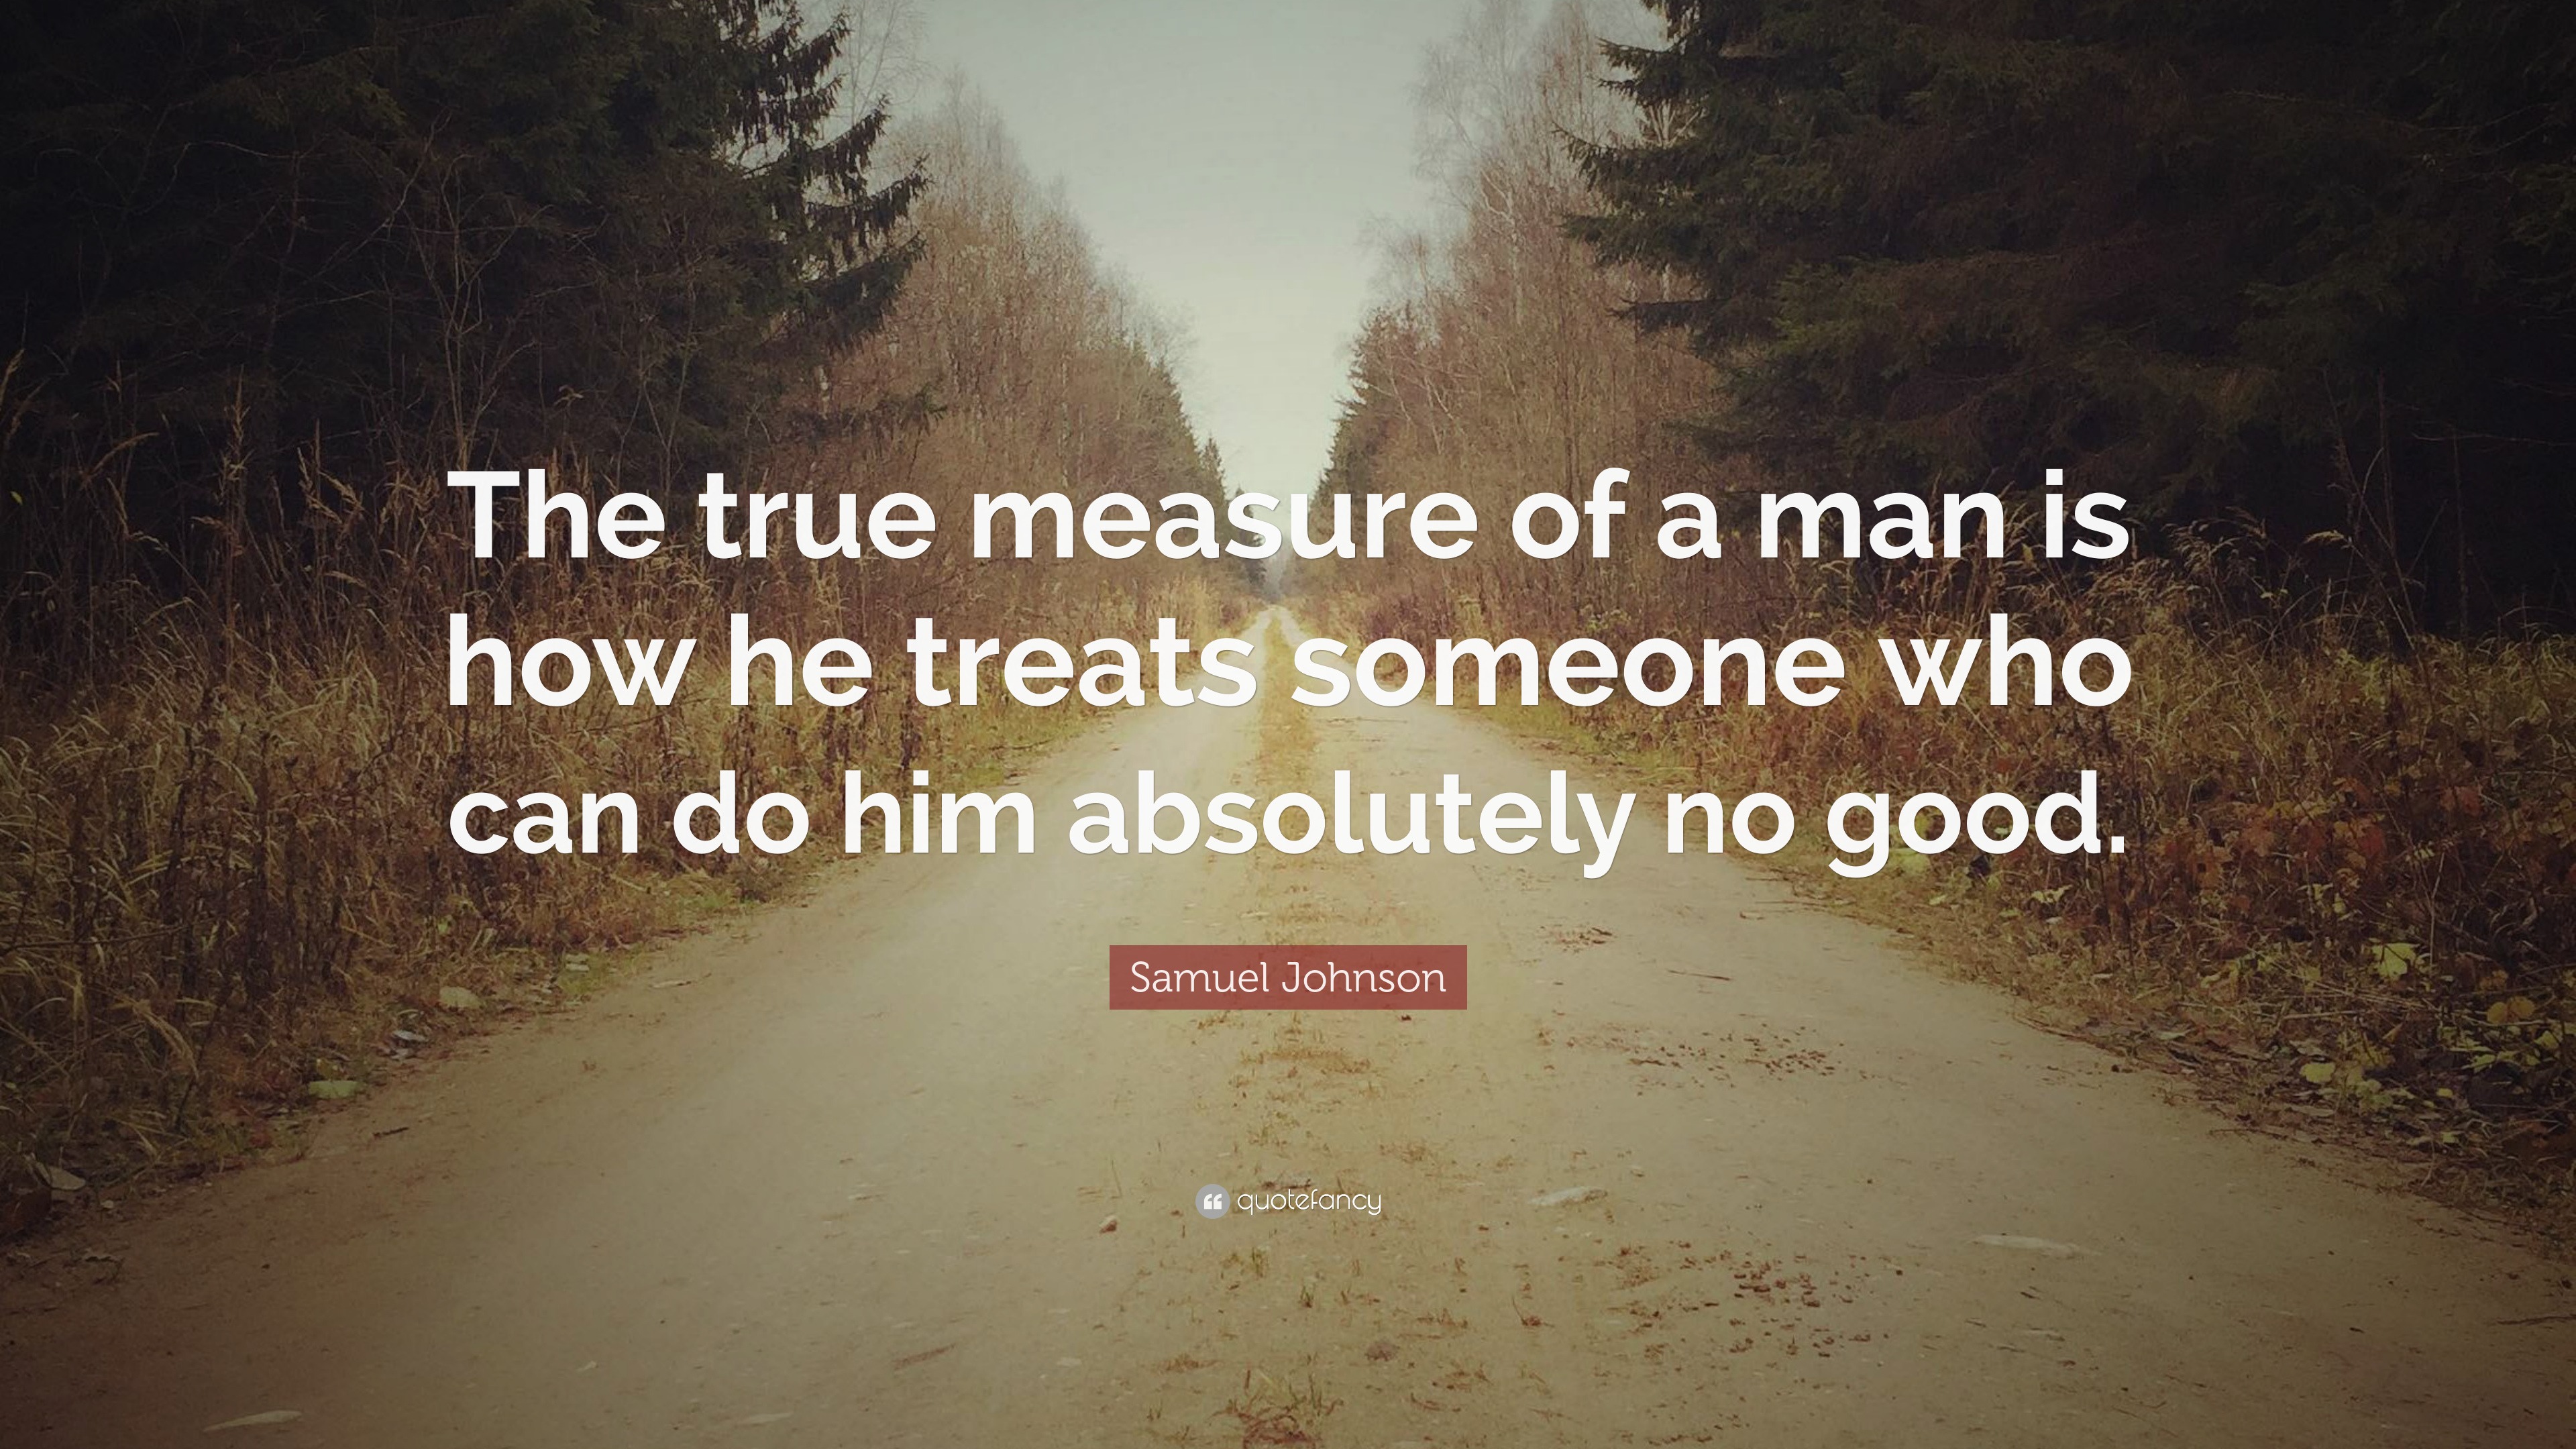 what is the true measure of a man